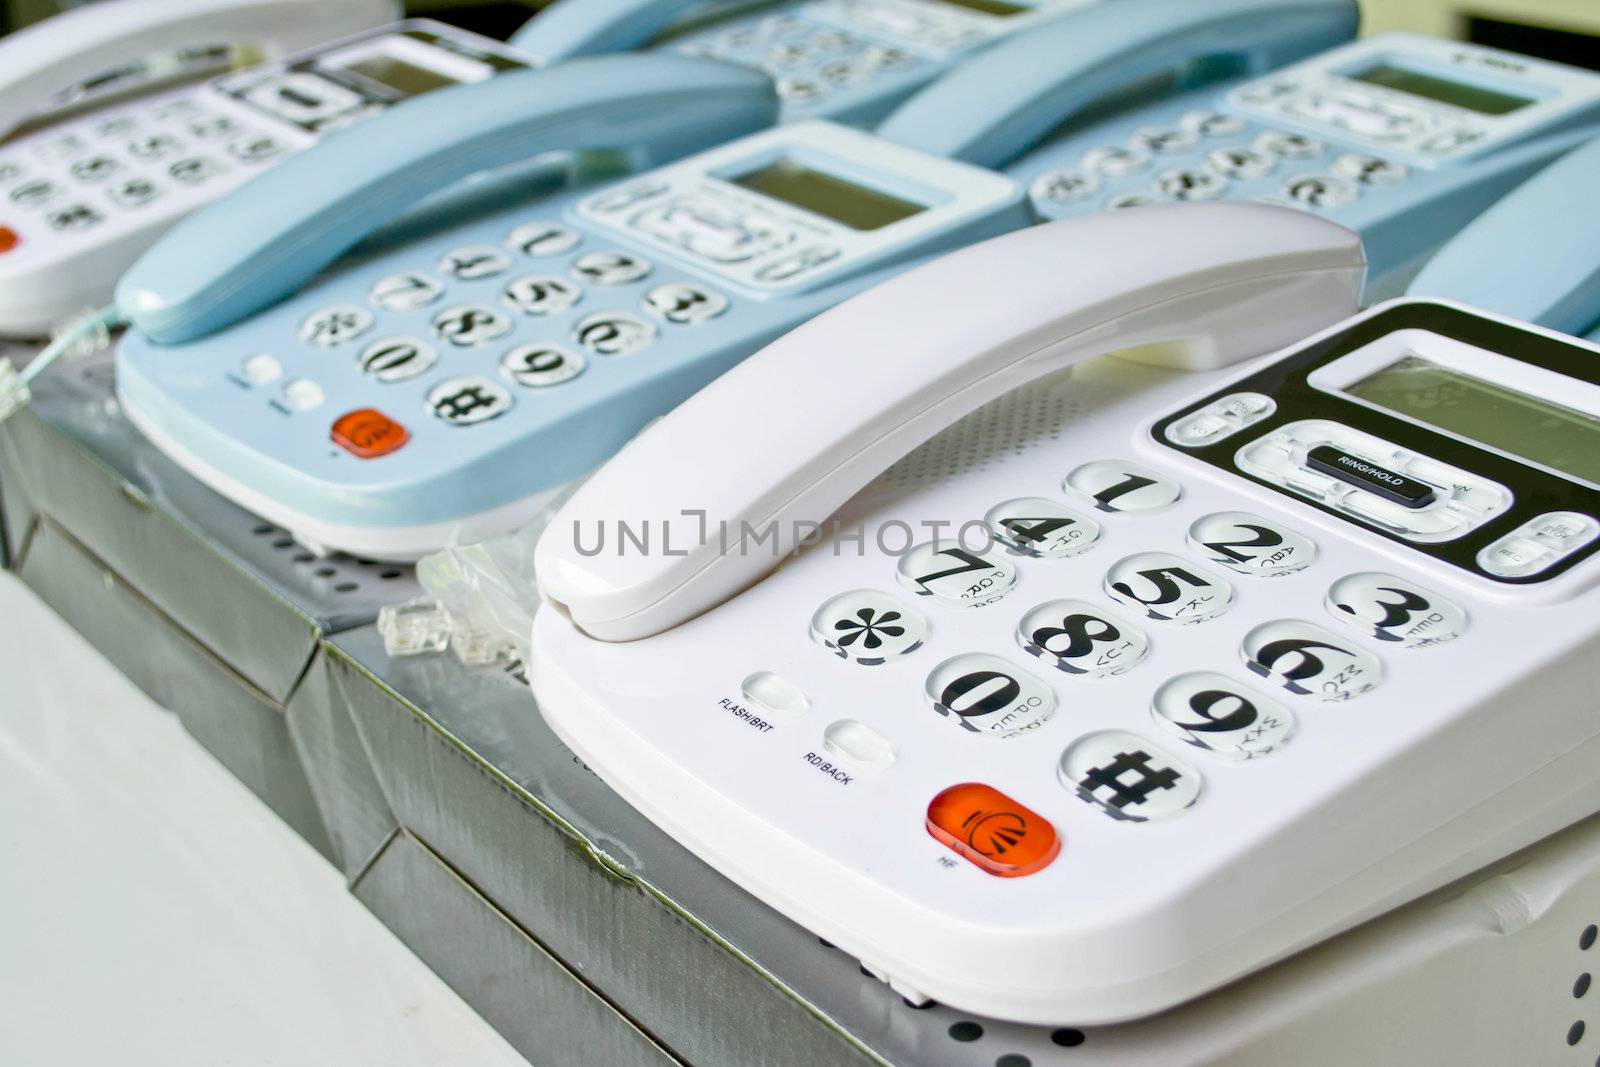 Set of telephones on a desk, receiver close-up by Thanamat